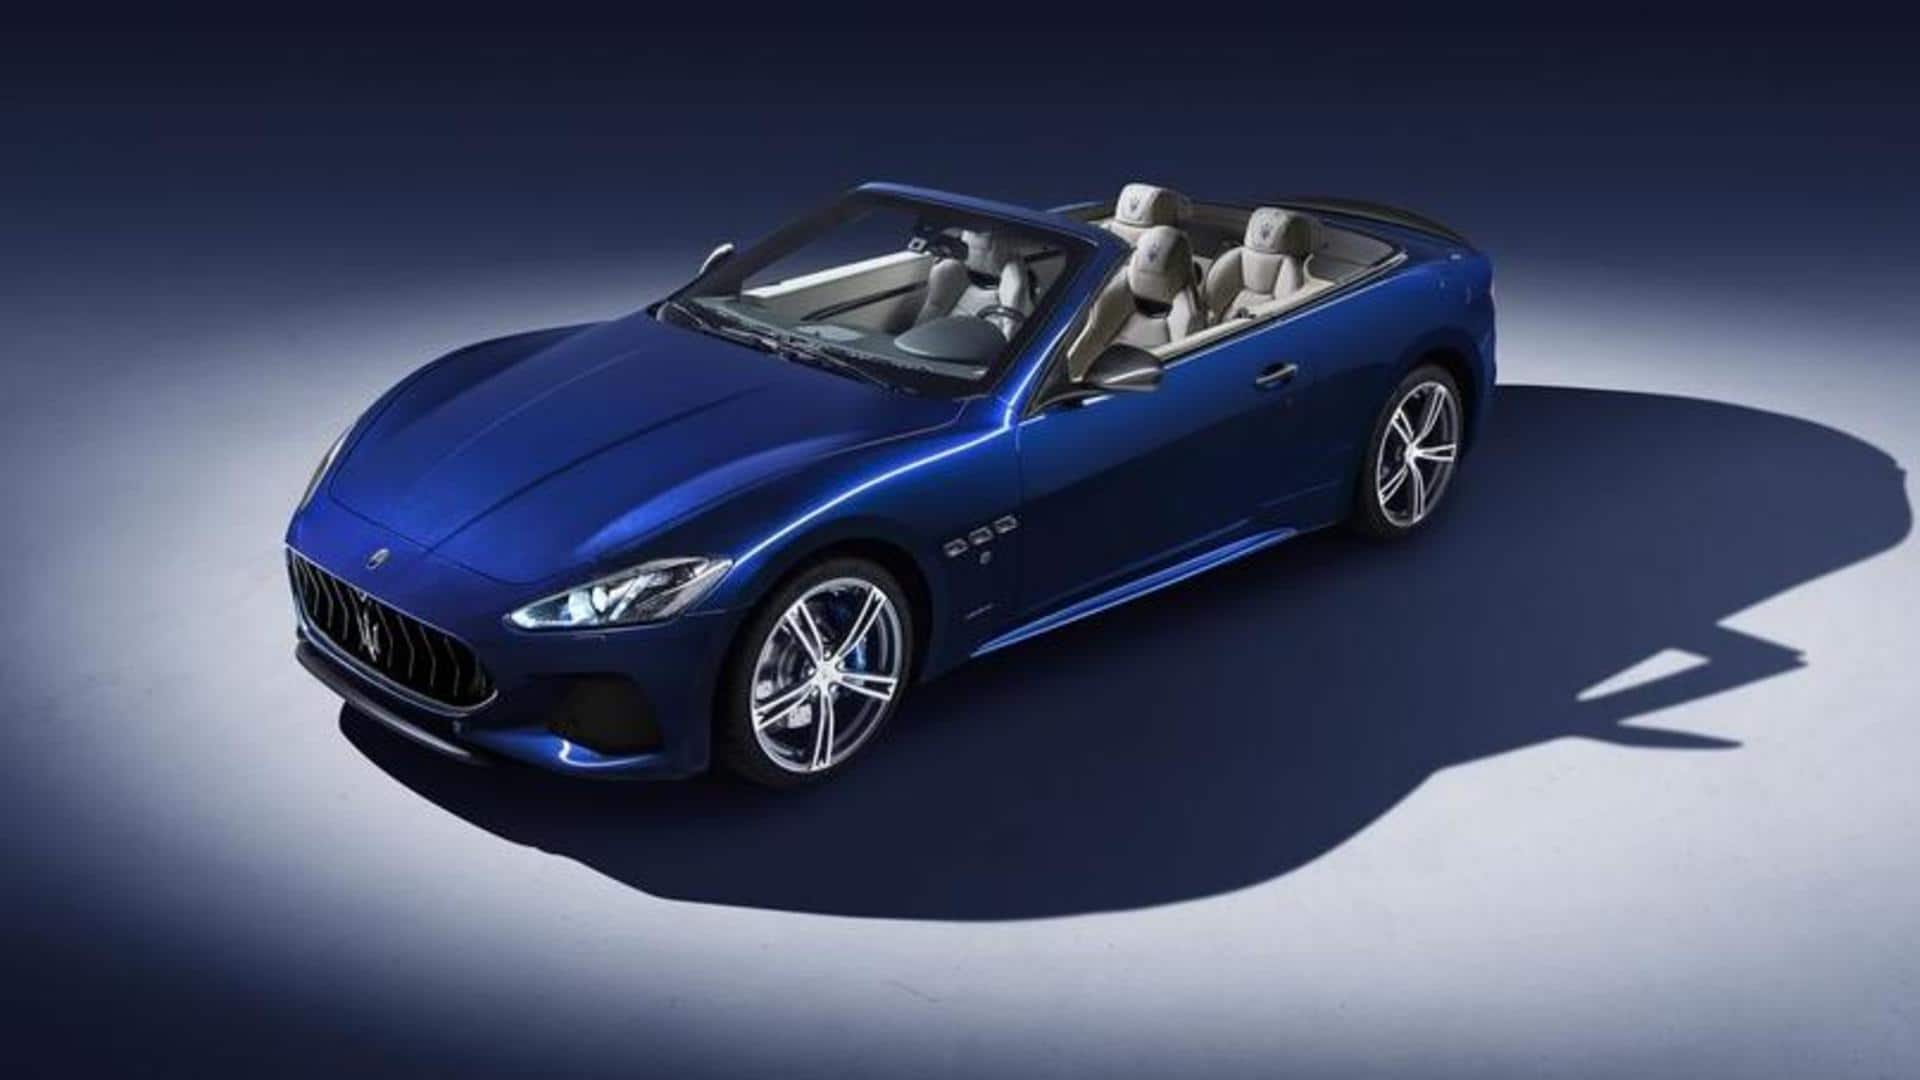 Maserati GranCabrio Folgore spotted doing test runs: What to expect?